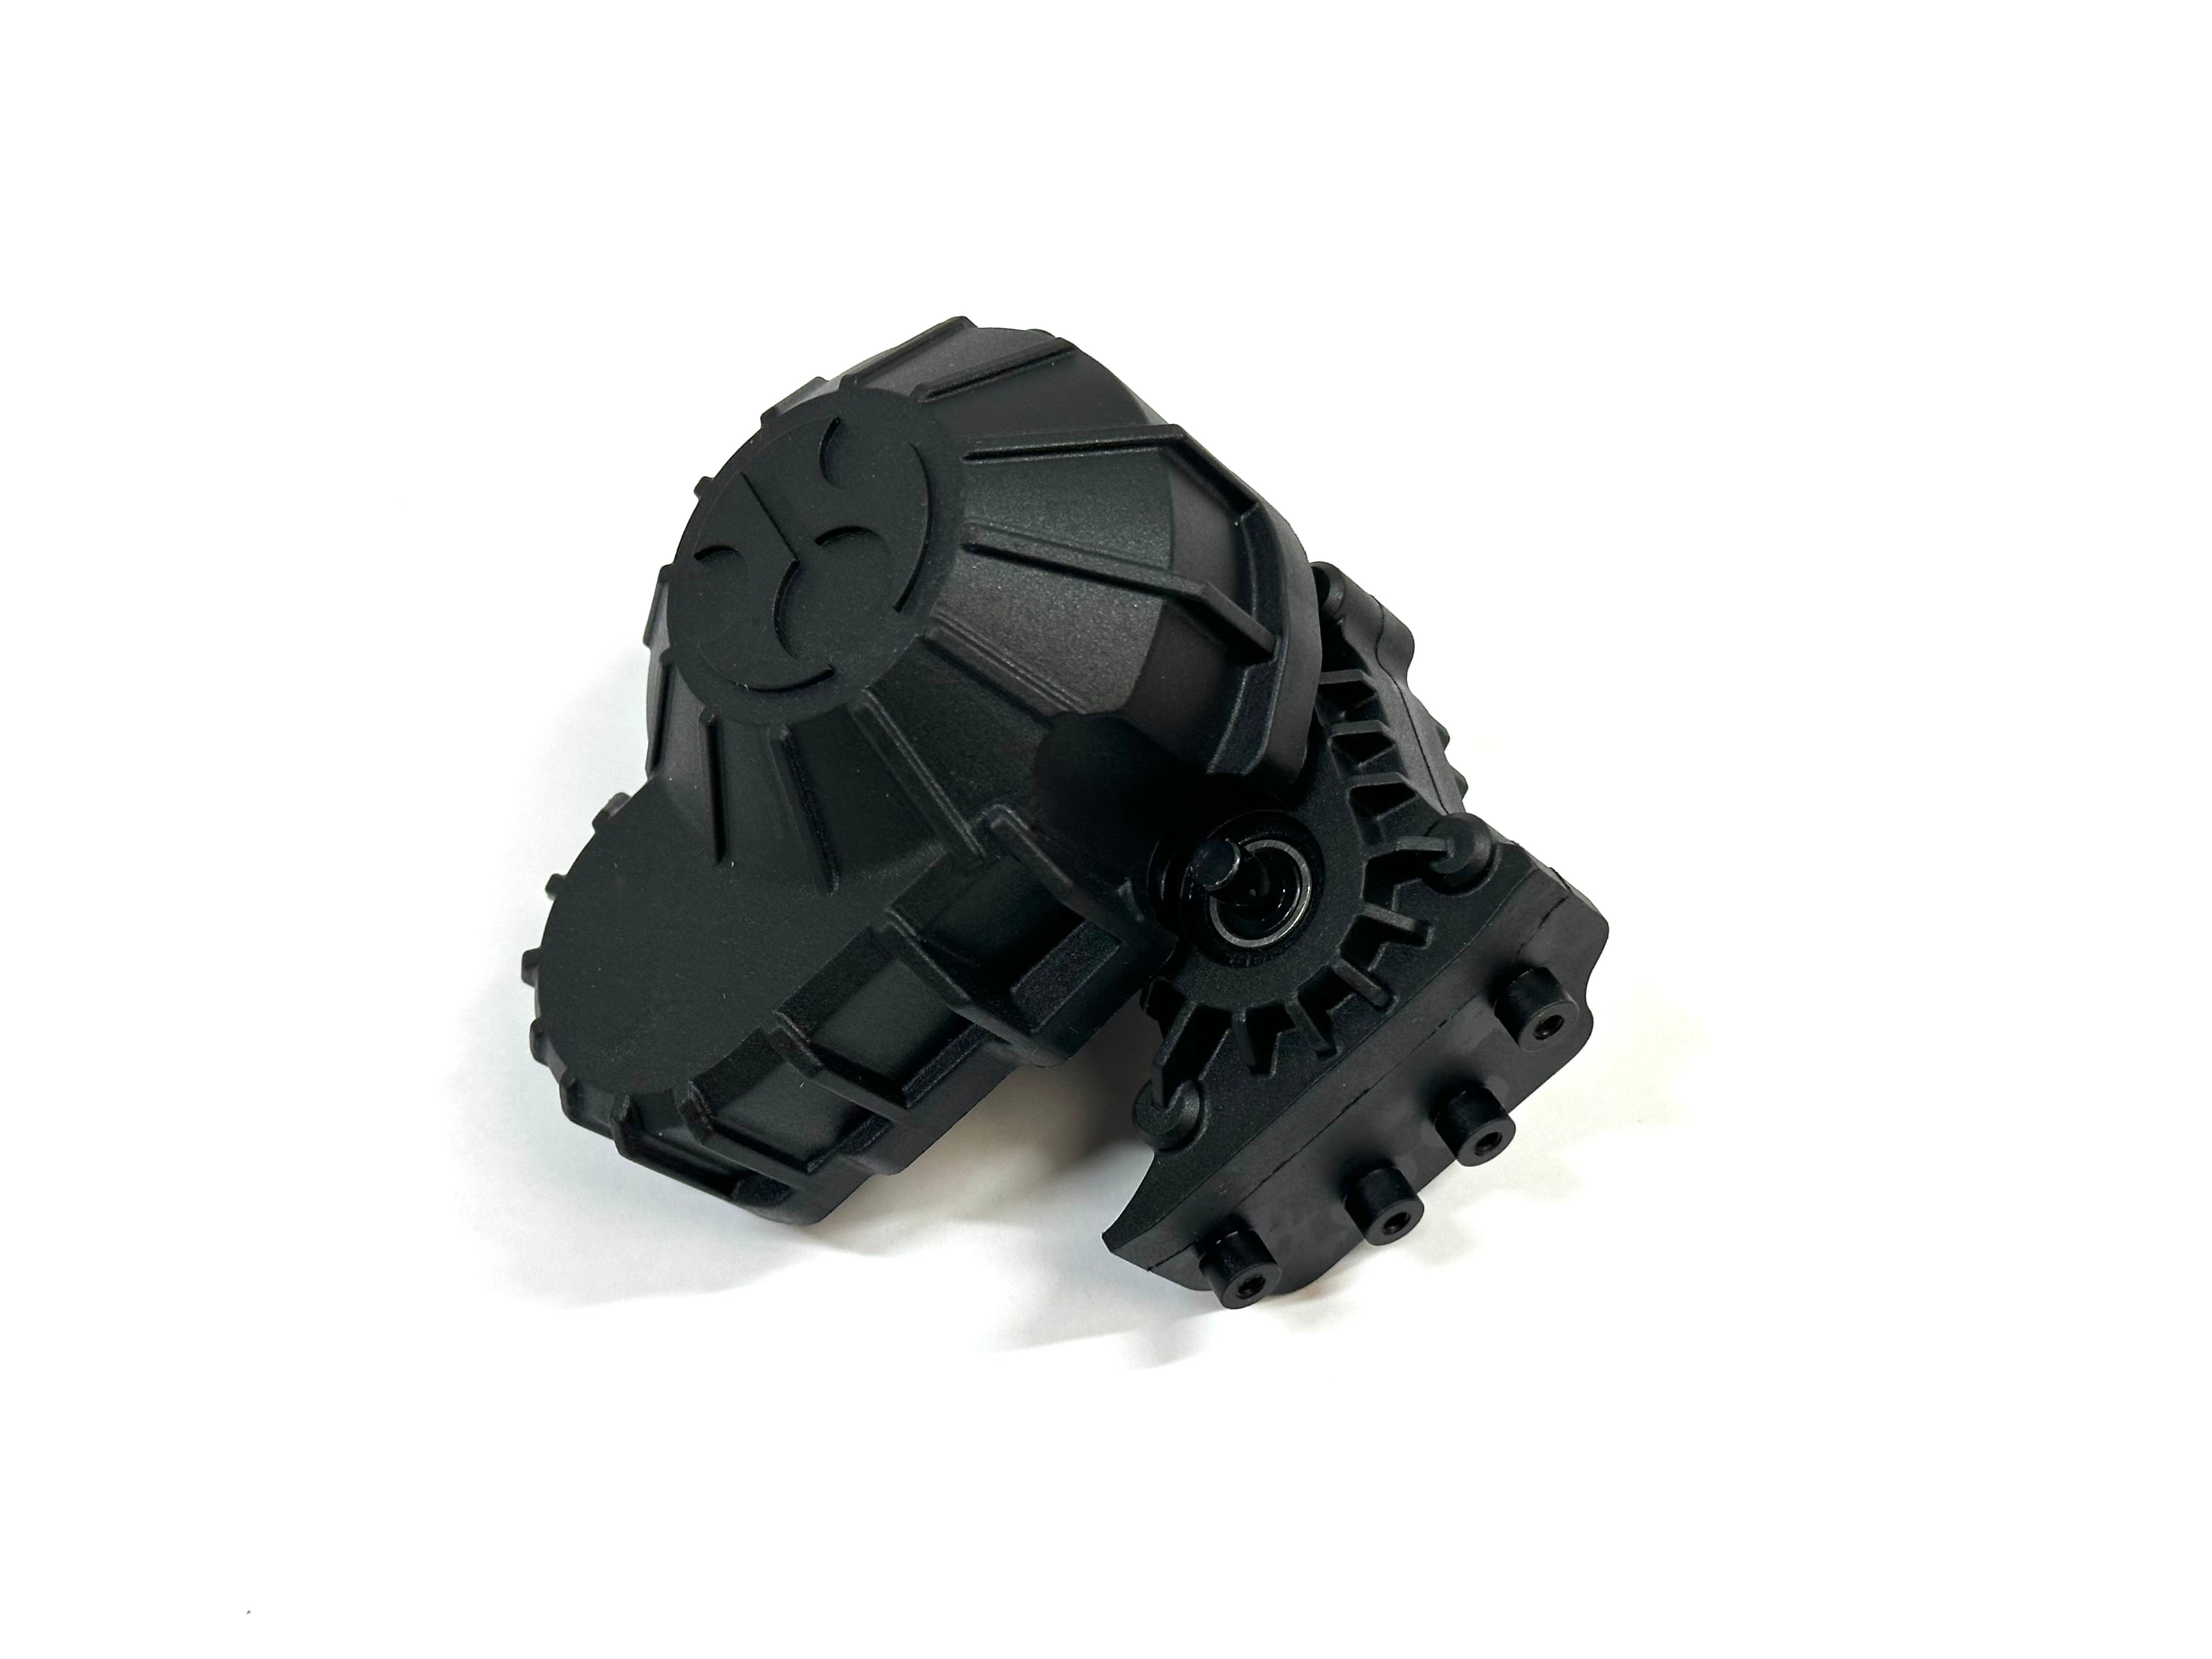 Axial SCX10iii Basecamp Stock Transmission